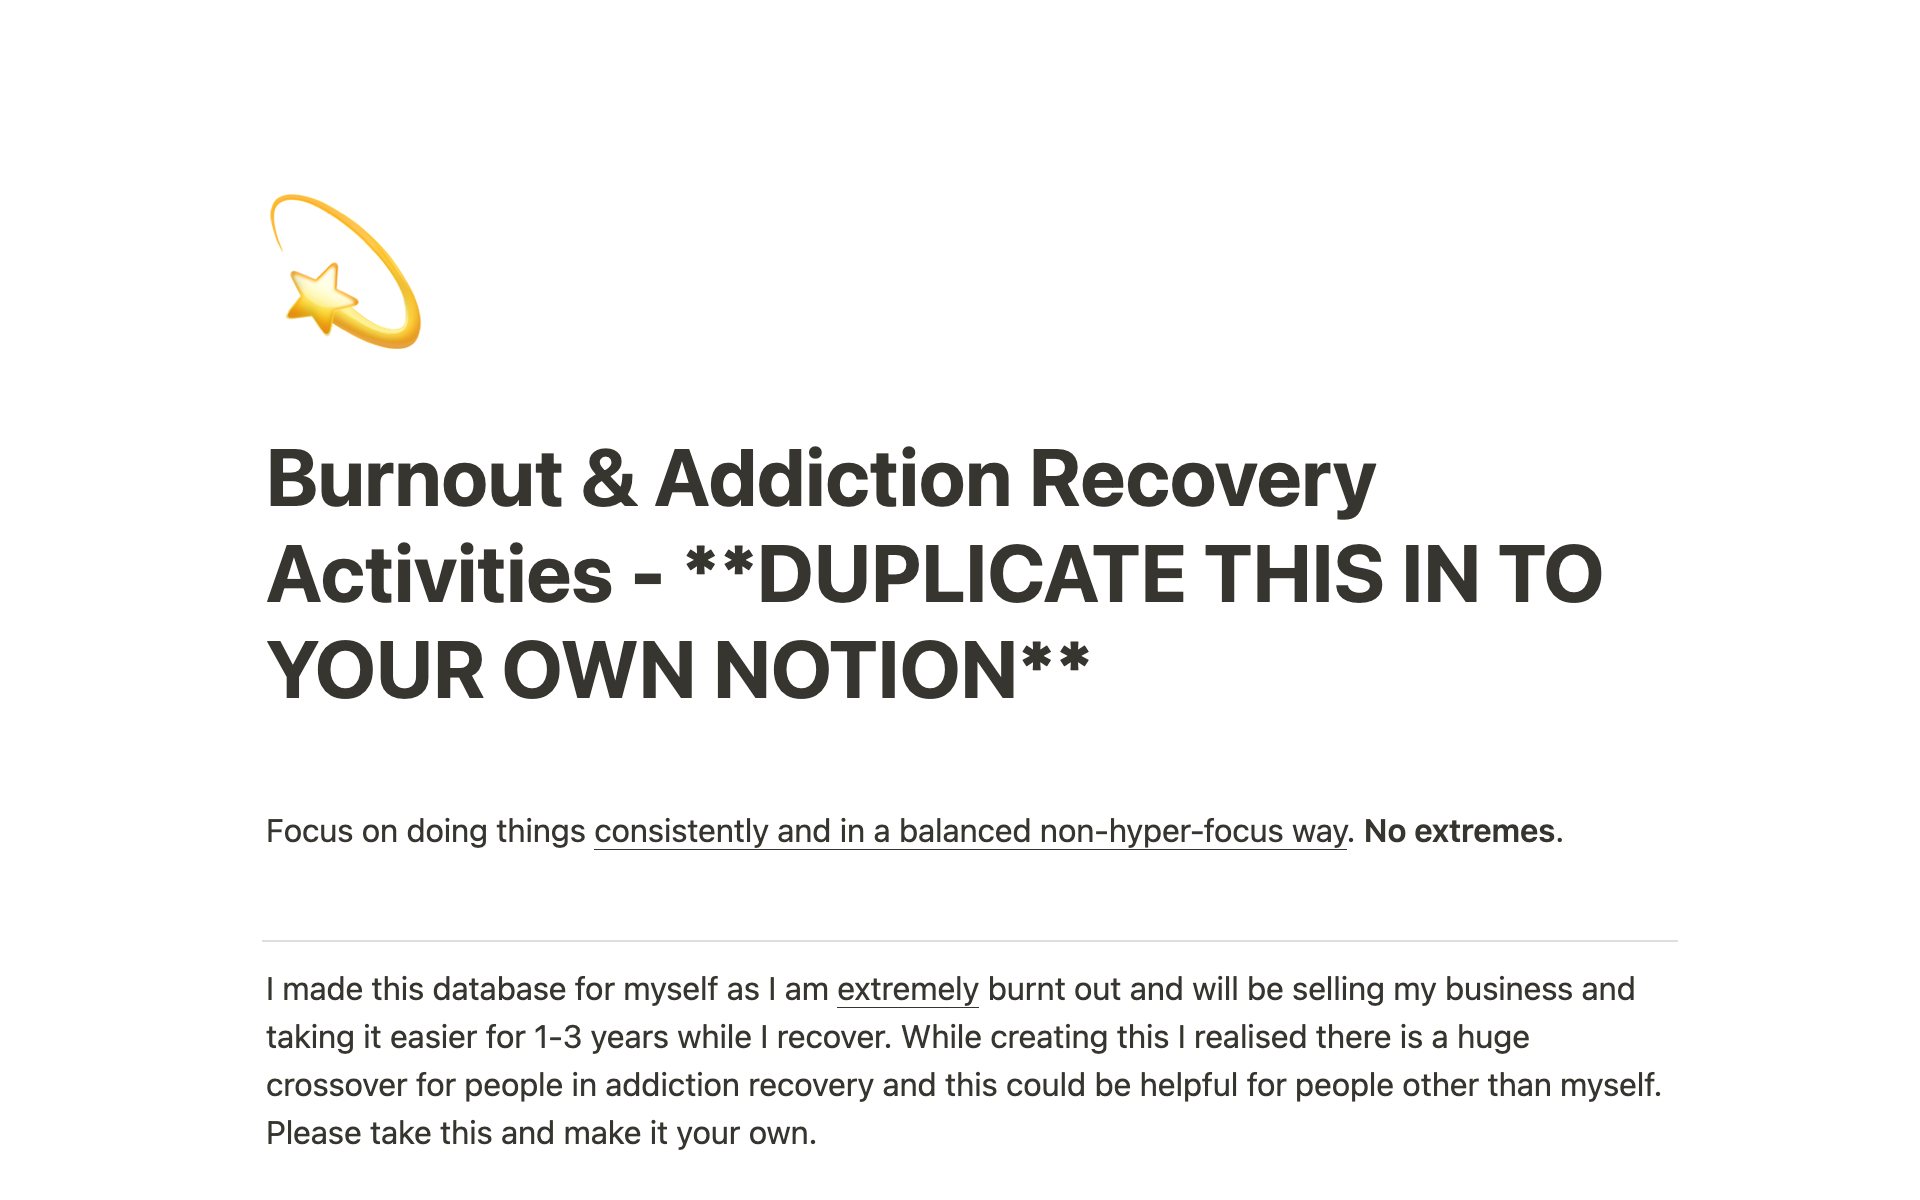 Help people in addiction recovery and burnout recovery think of activities they can do to keep entertained.